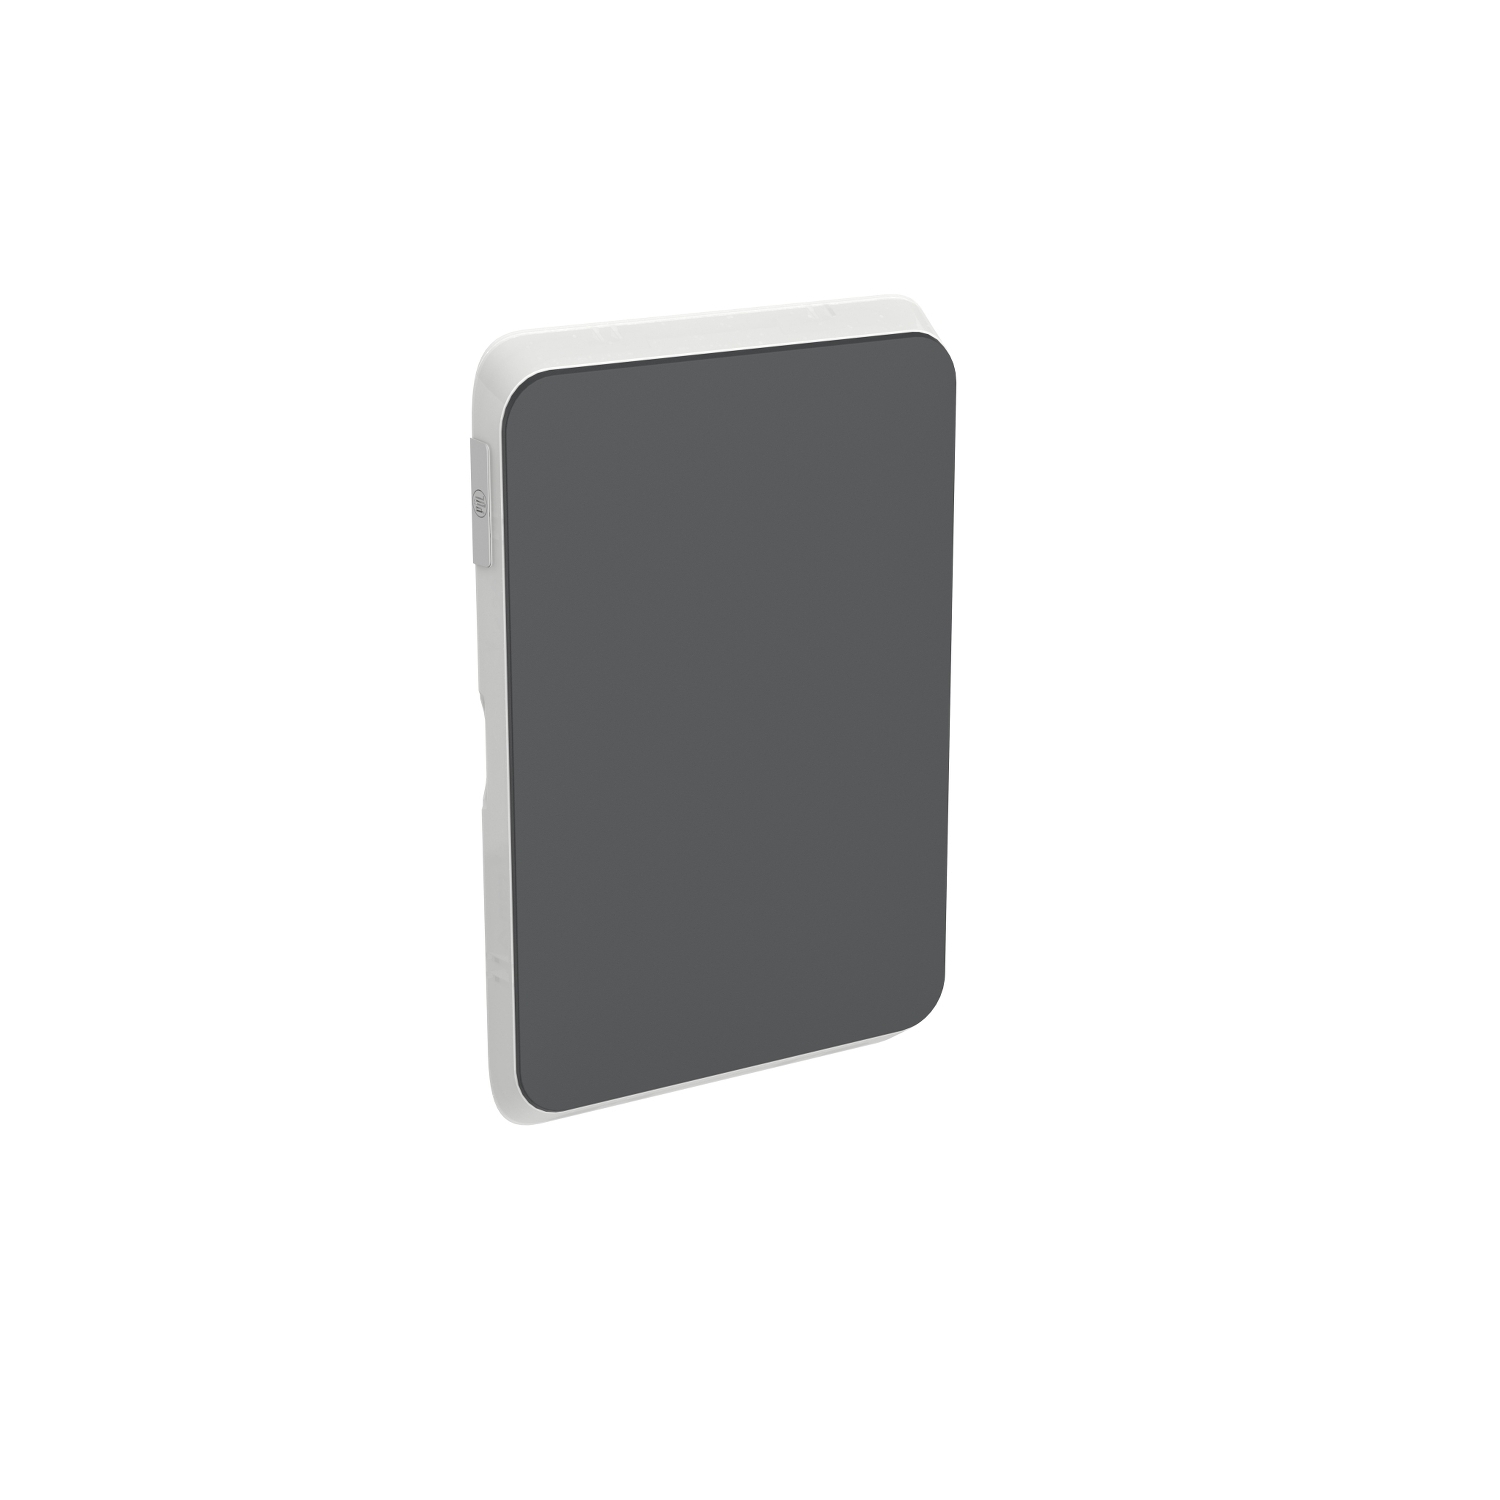 PDL350C-AN - PDL Iconic Cover Plate Blank Plate - Anthracite